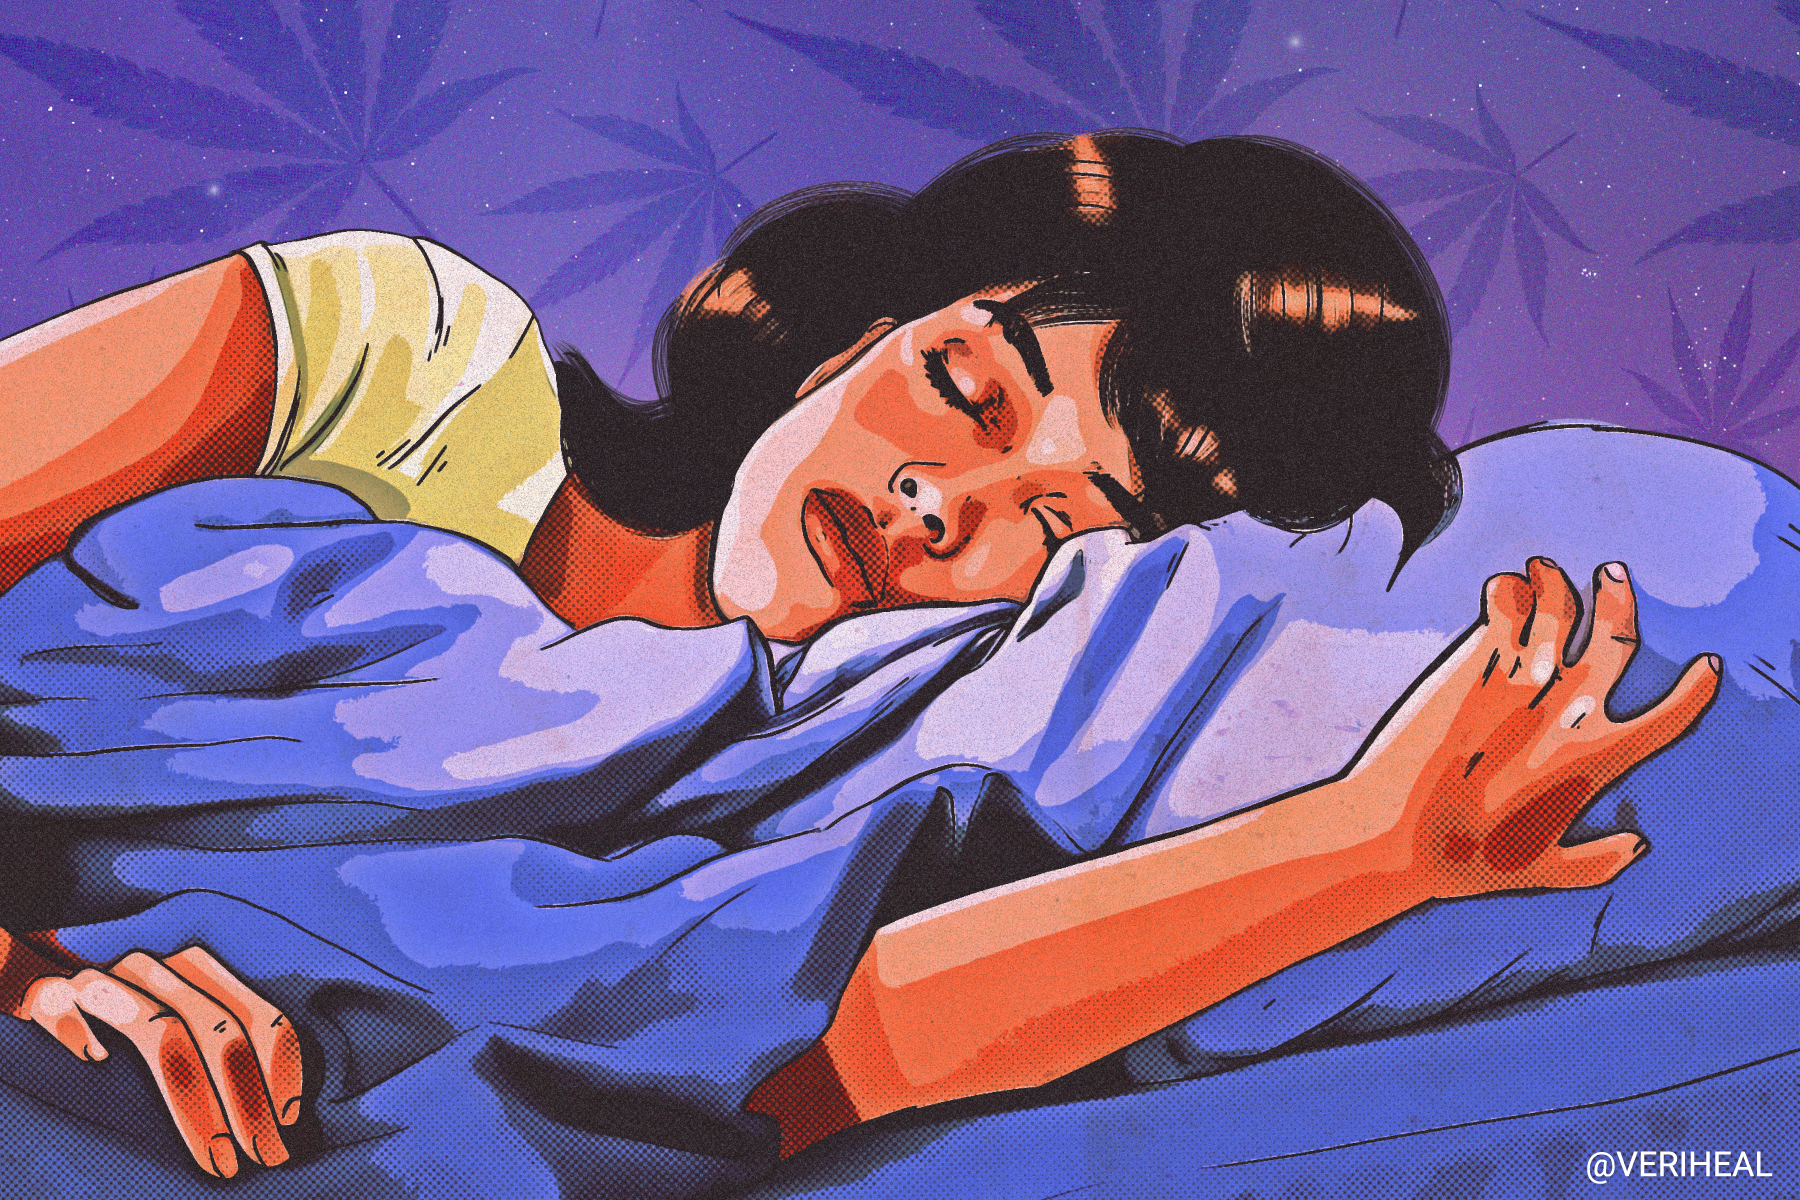 Cannabinoids May Promote a Good Night’s Sleep, Study Finds